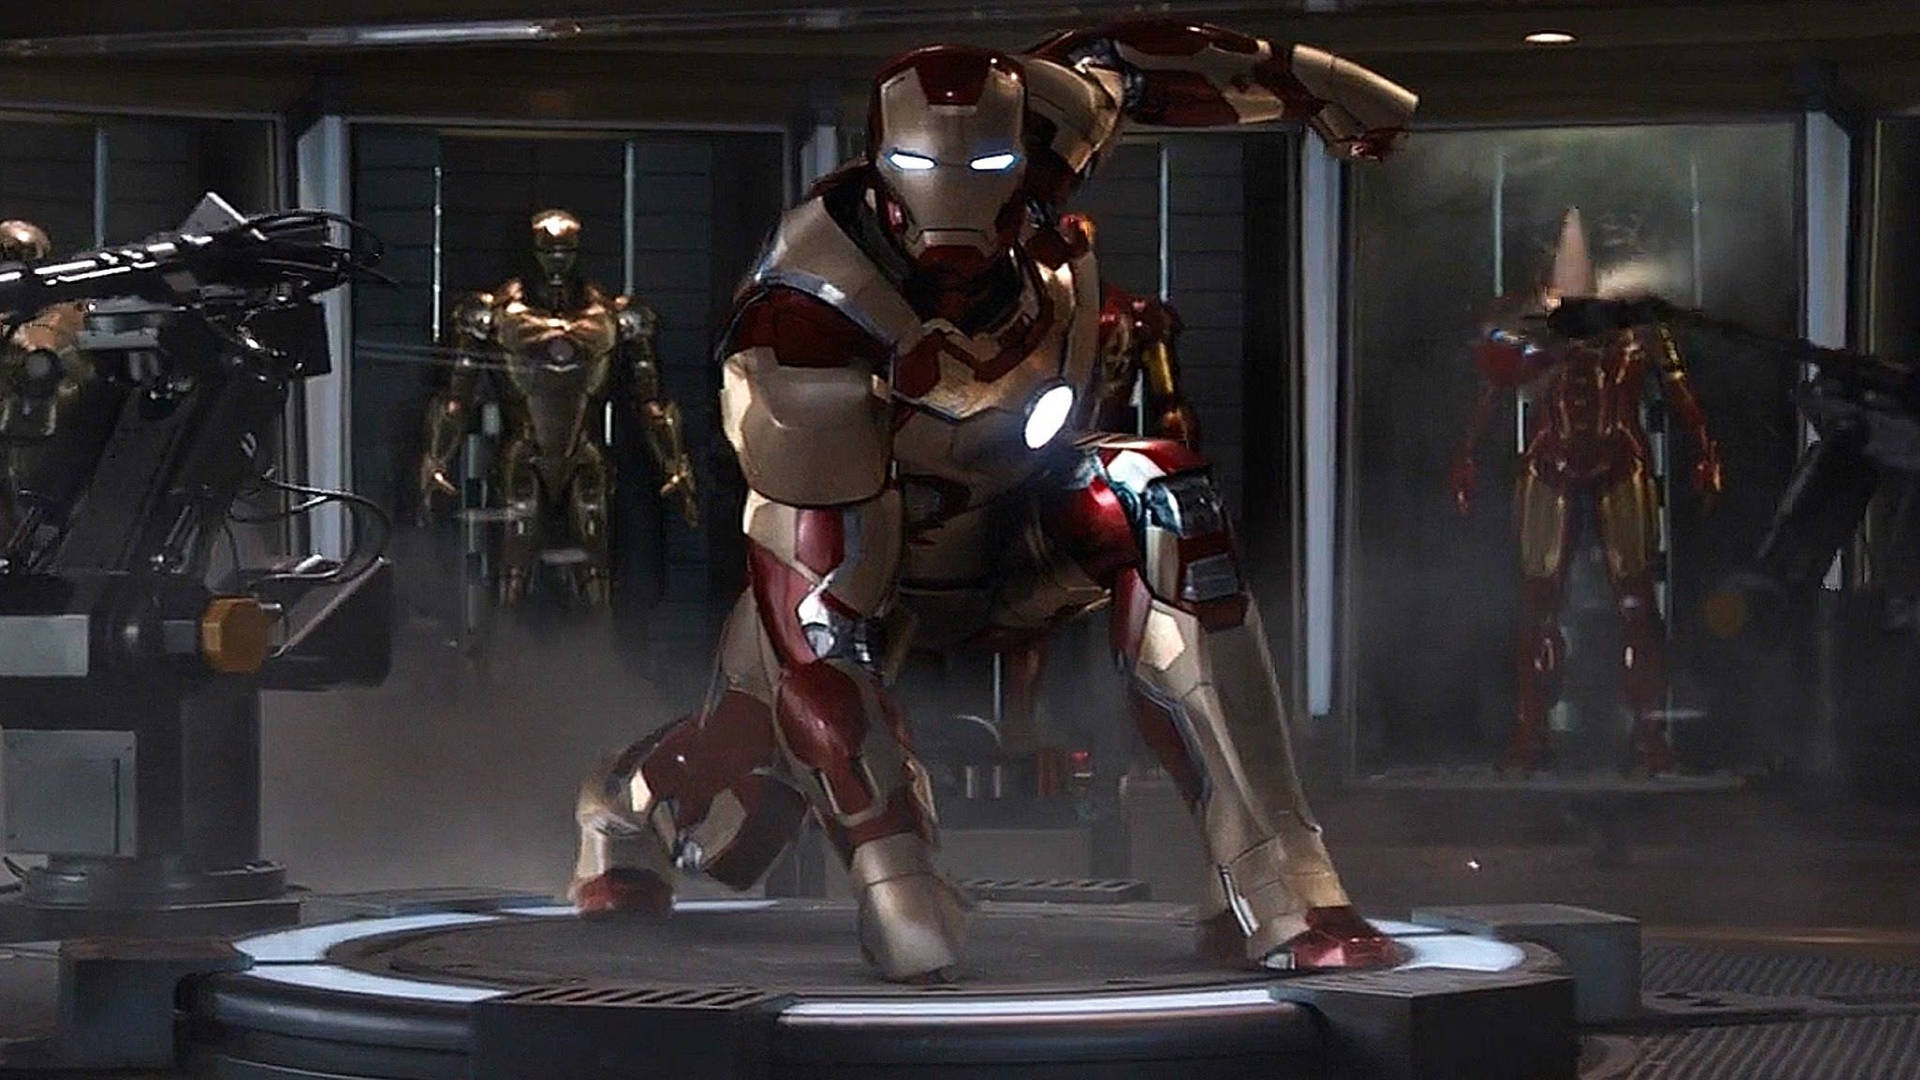 Iron Man Mark 3 Ready for Action Wallpaper